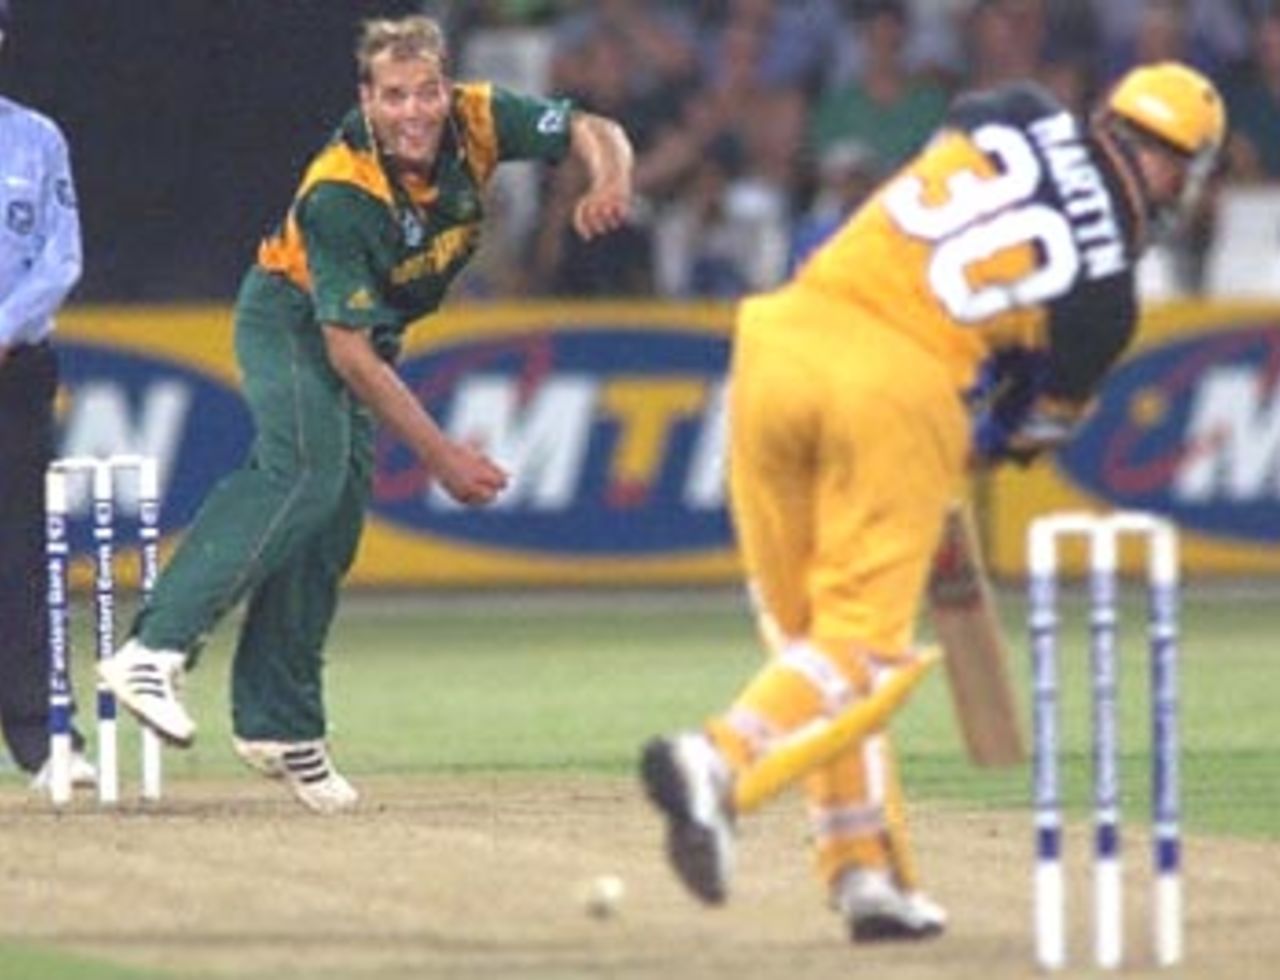 South African bowler Jacques Kallis (L) delivers a ball to Australian batsman Damien Martyn during a ODI match at the Kingsmead oval in Durban 12 April 2000. South African Makhaya Ntini has taken four wickets as the first three one day match series got under way and South Africa is currently 218 for 7